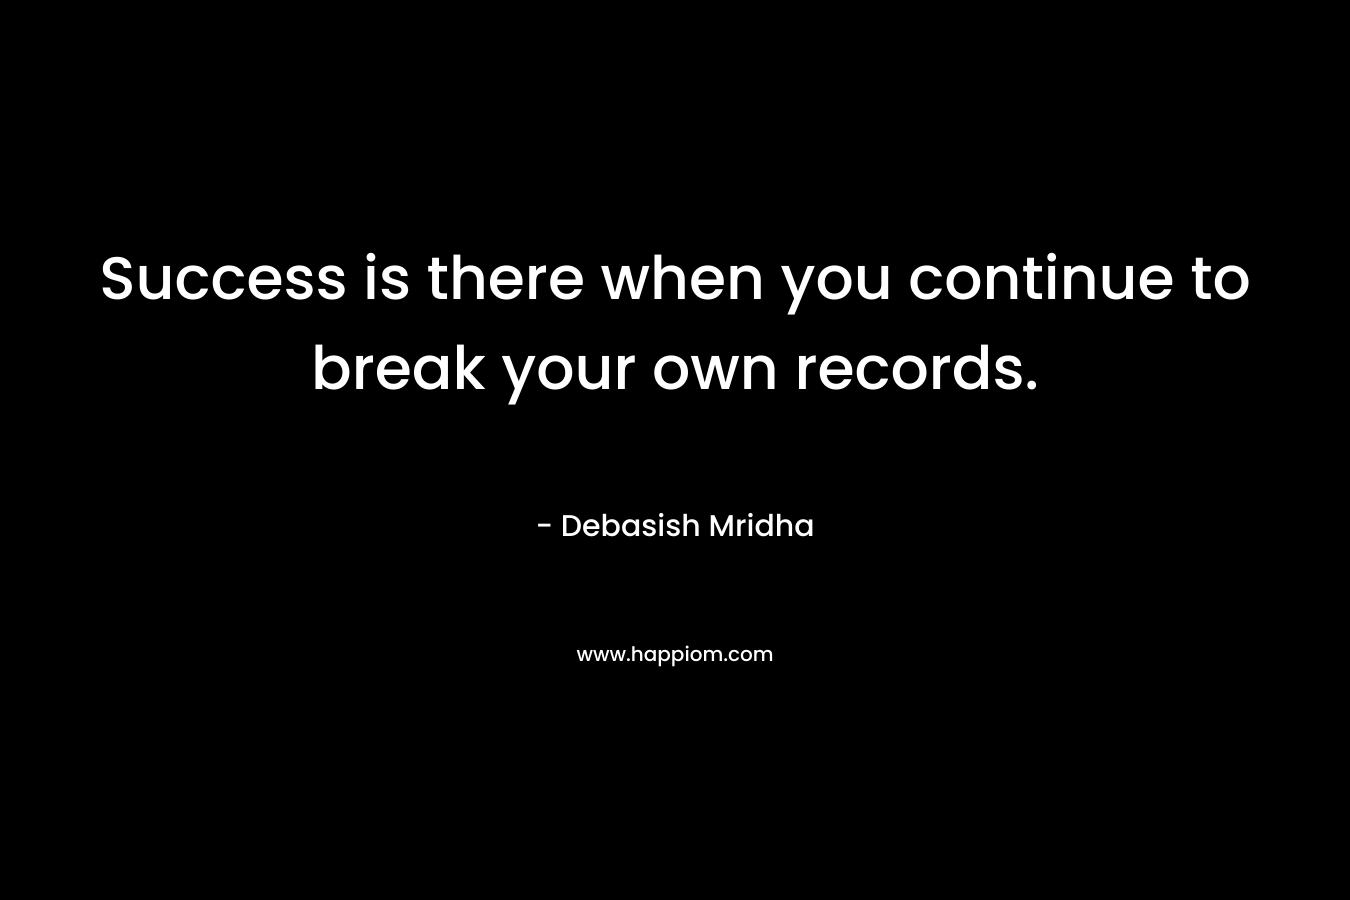 Success is there when you continue to break your own records.